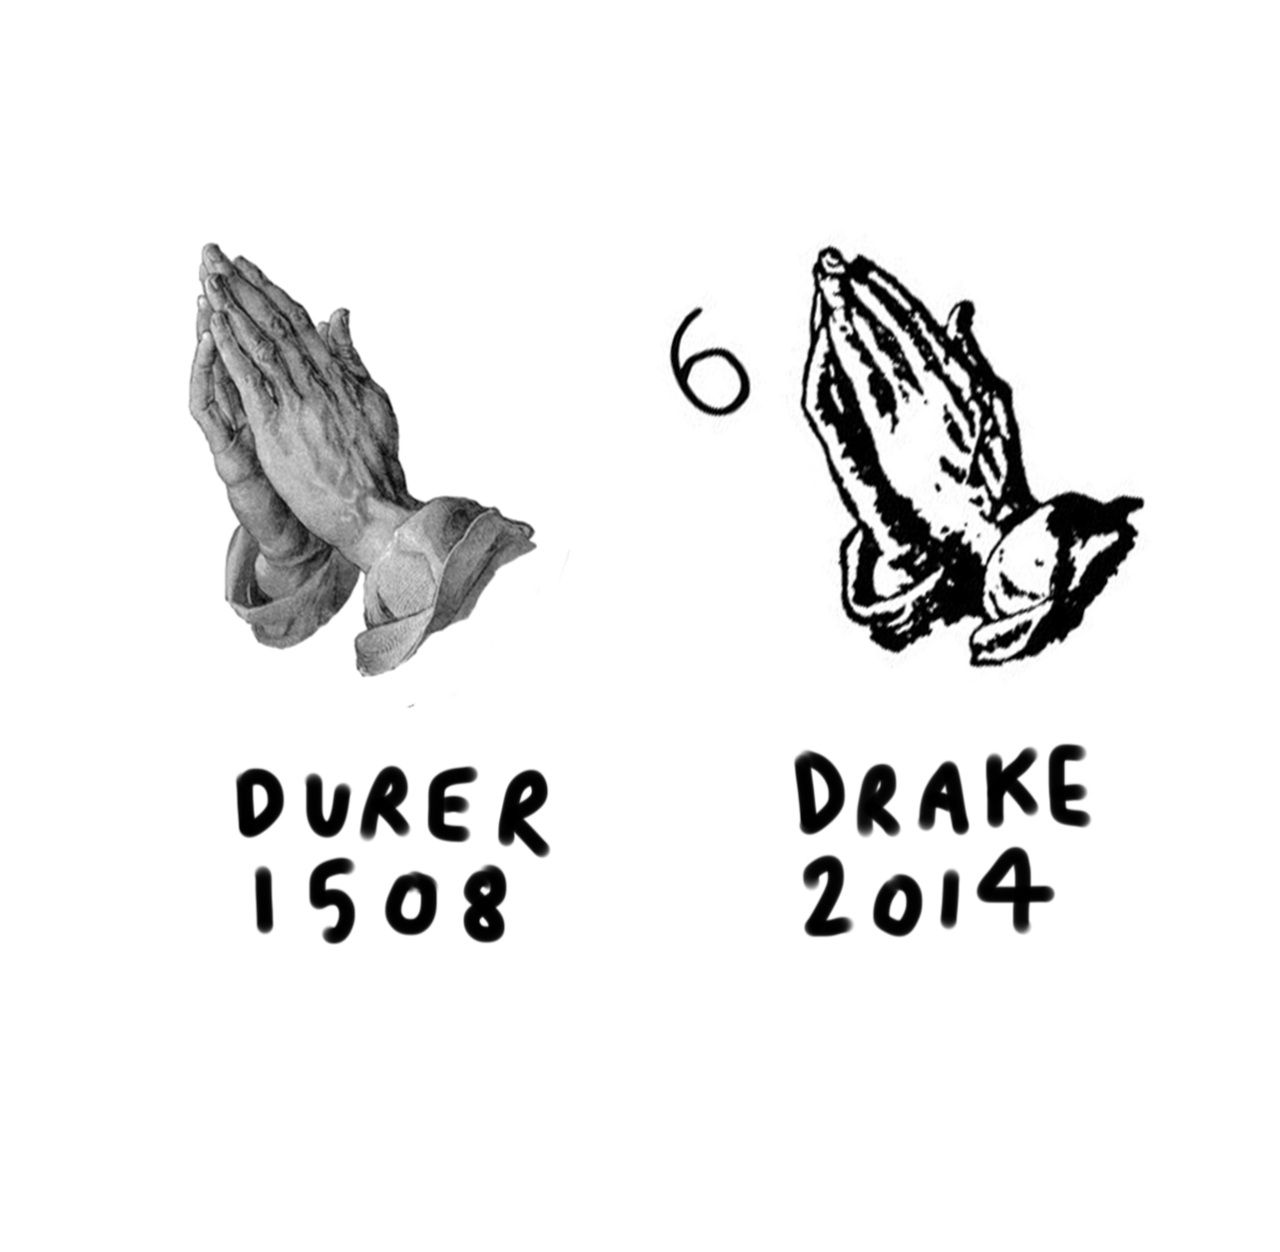  A. Durer Praying hands (removed from background) 1508 / Right: Drake 6 artwork 2014/2015 